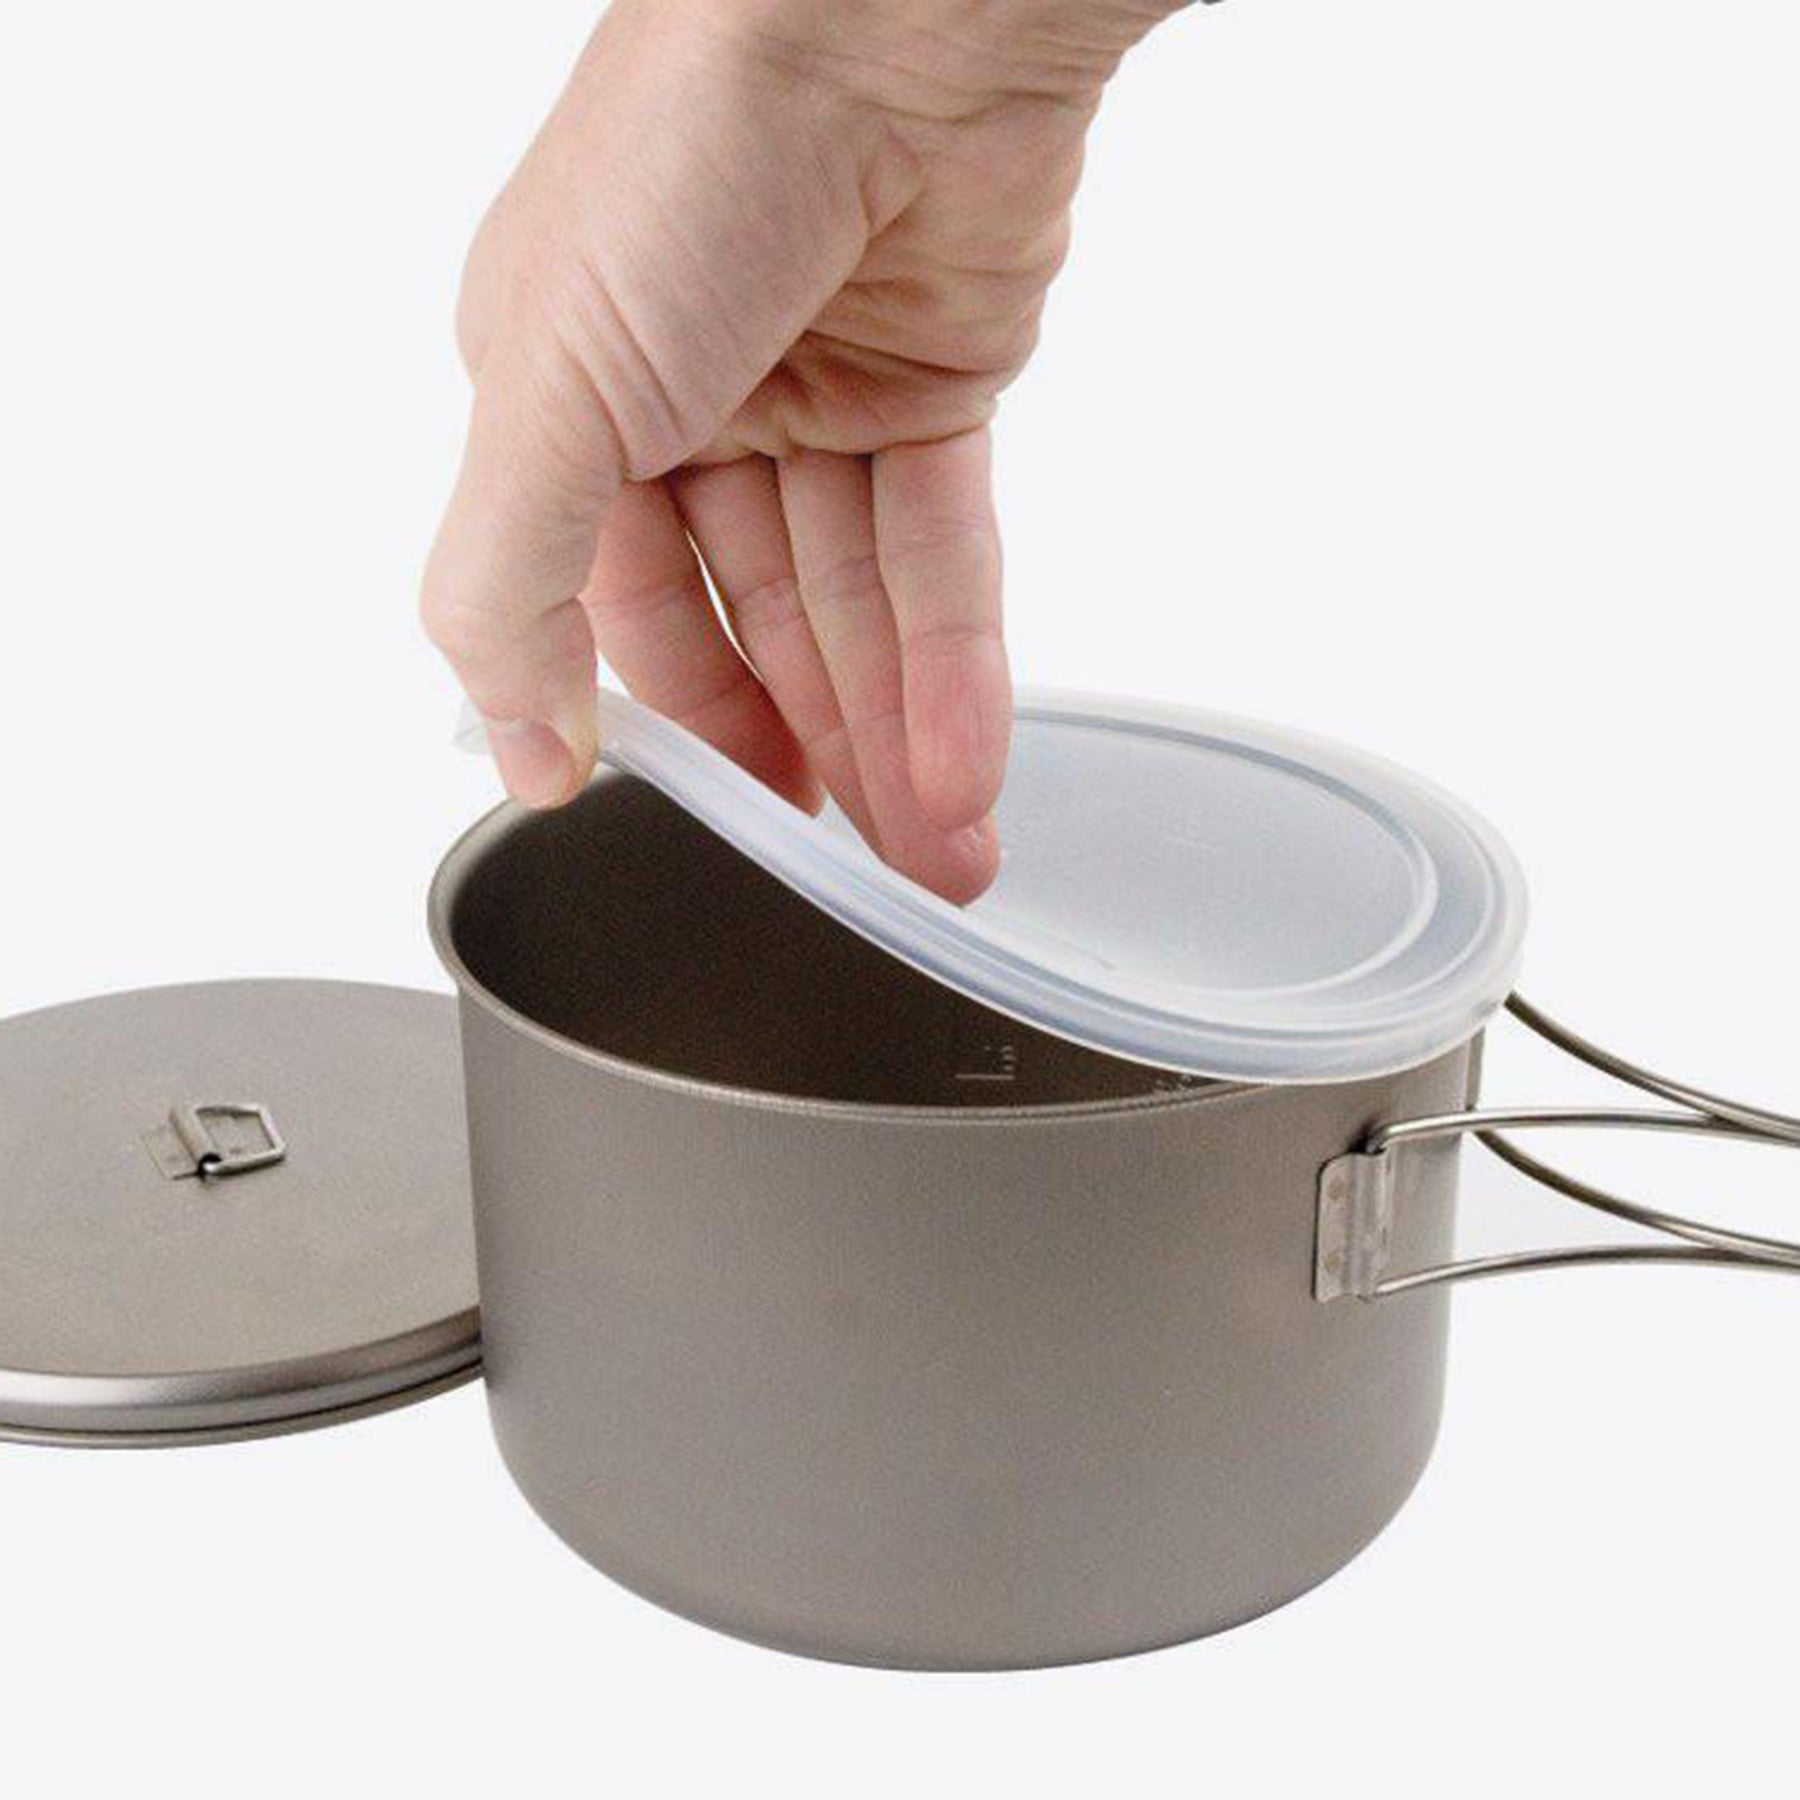 a model's hand put the plastic lid on the pot